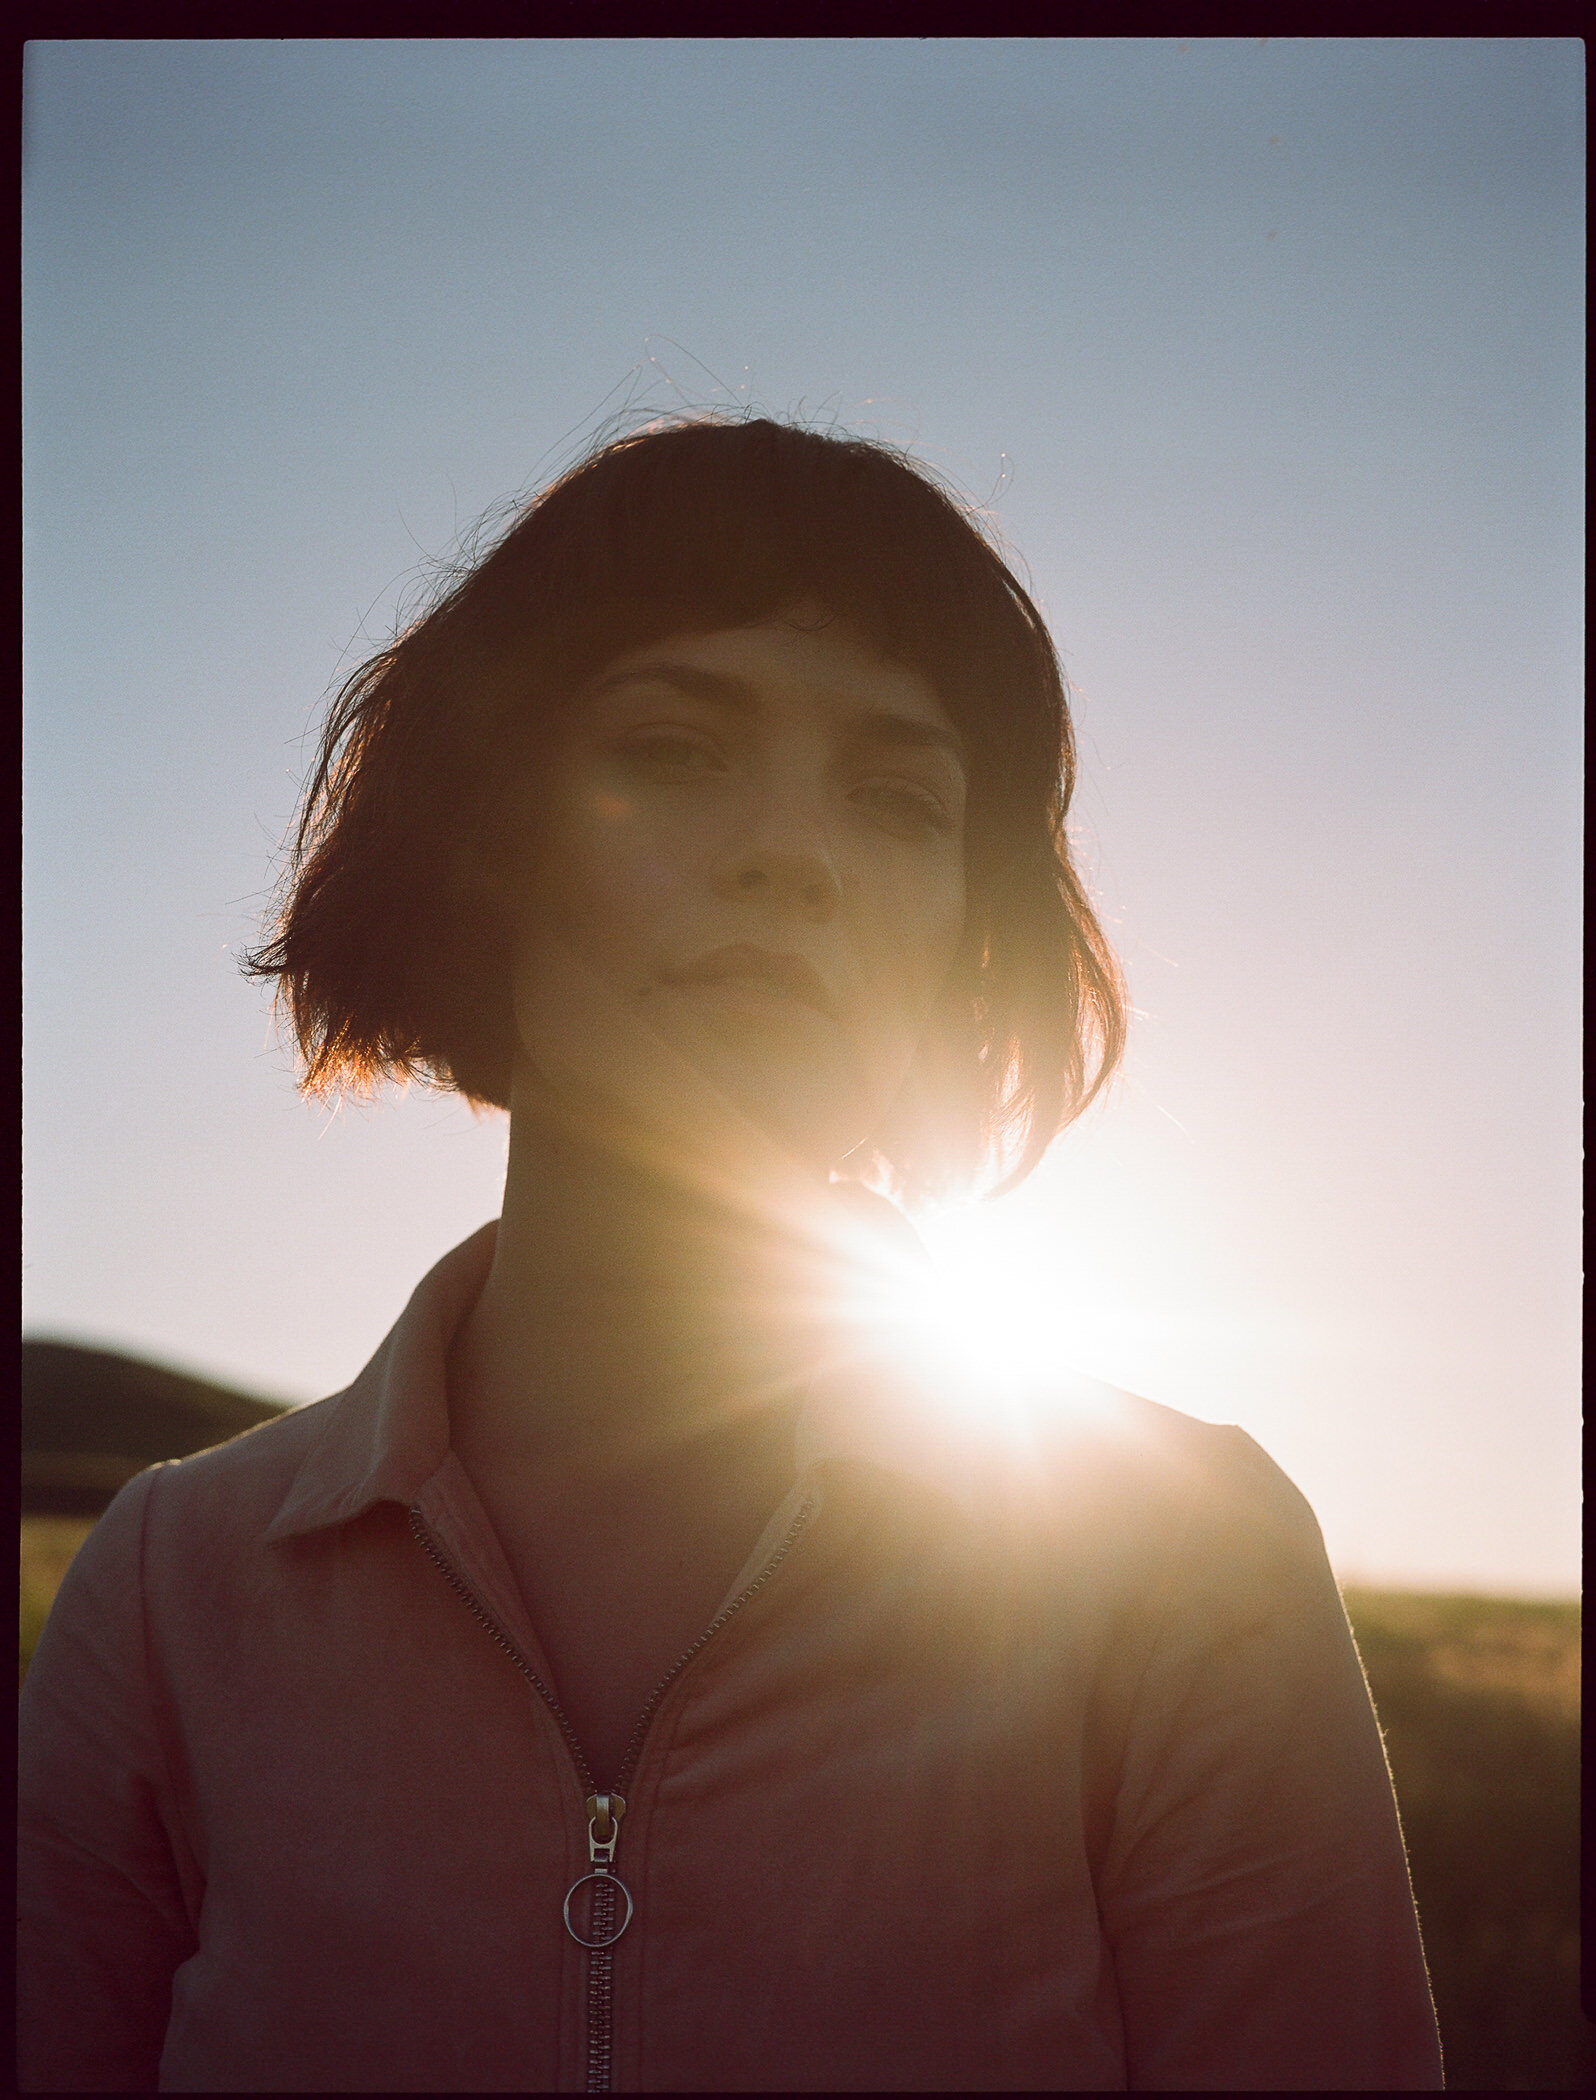 Medium format portrait of Hannah Fuchser; face is slightly distorted with the sunlight beaming at her shoulder